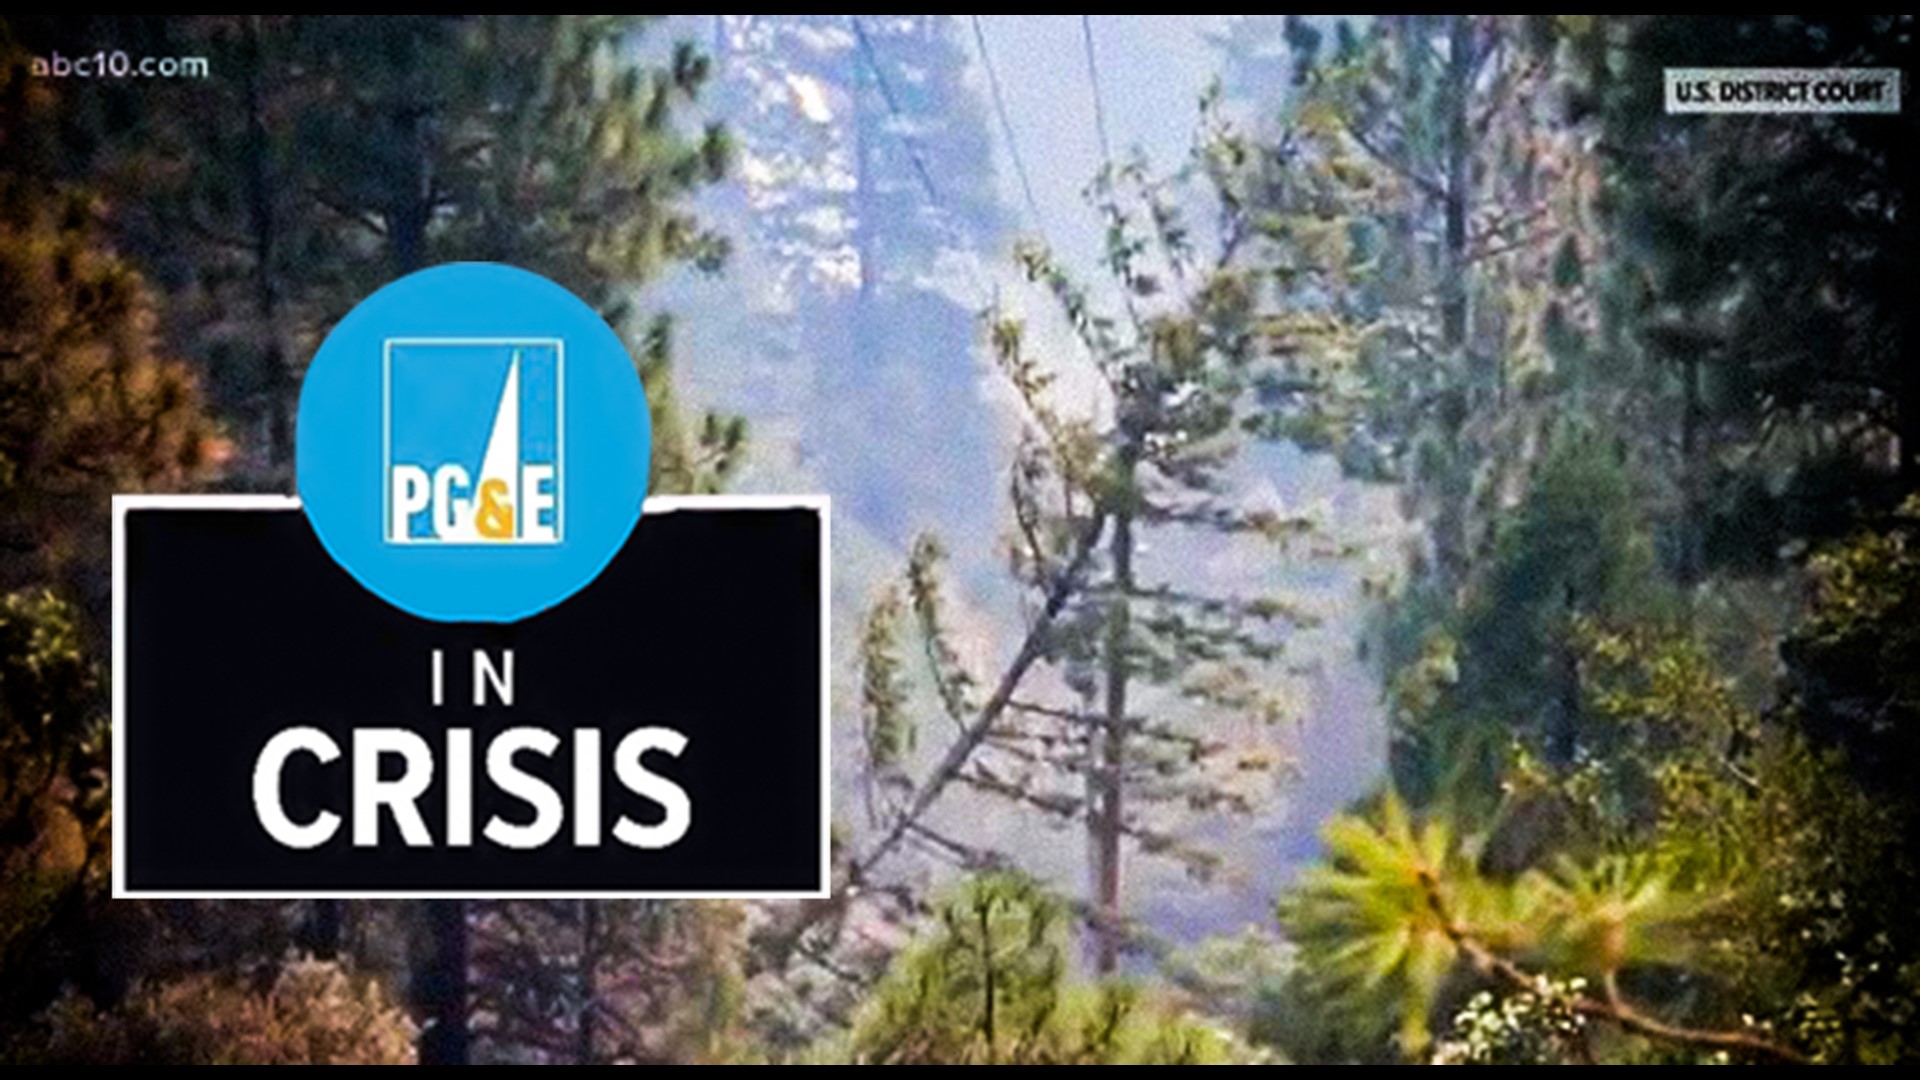 Leading a coalition of other counties in his fight to hold PG&E accountable for its alleged crimes, the Butte County District Attorney said the work continues.